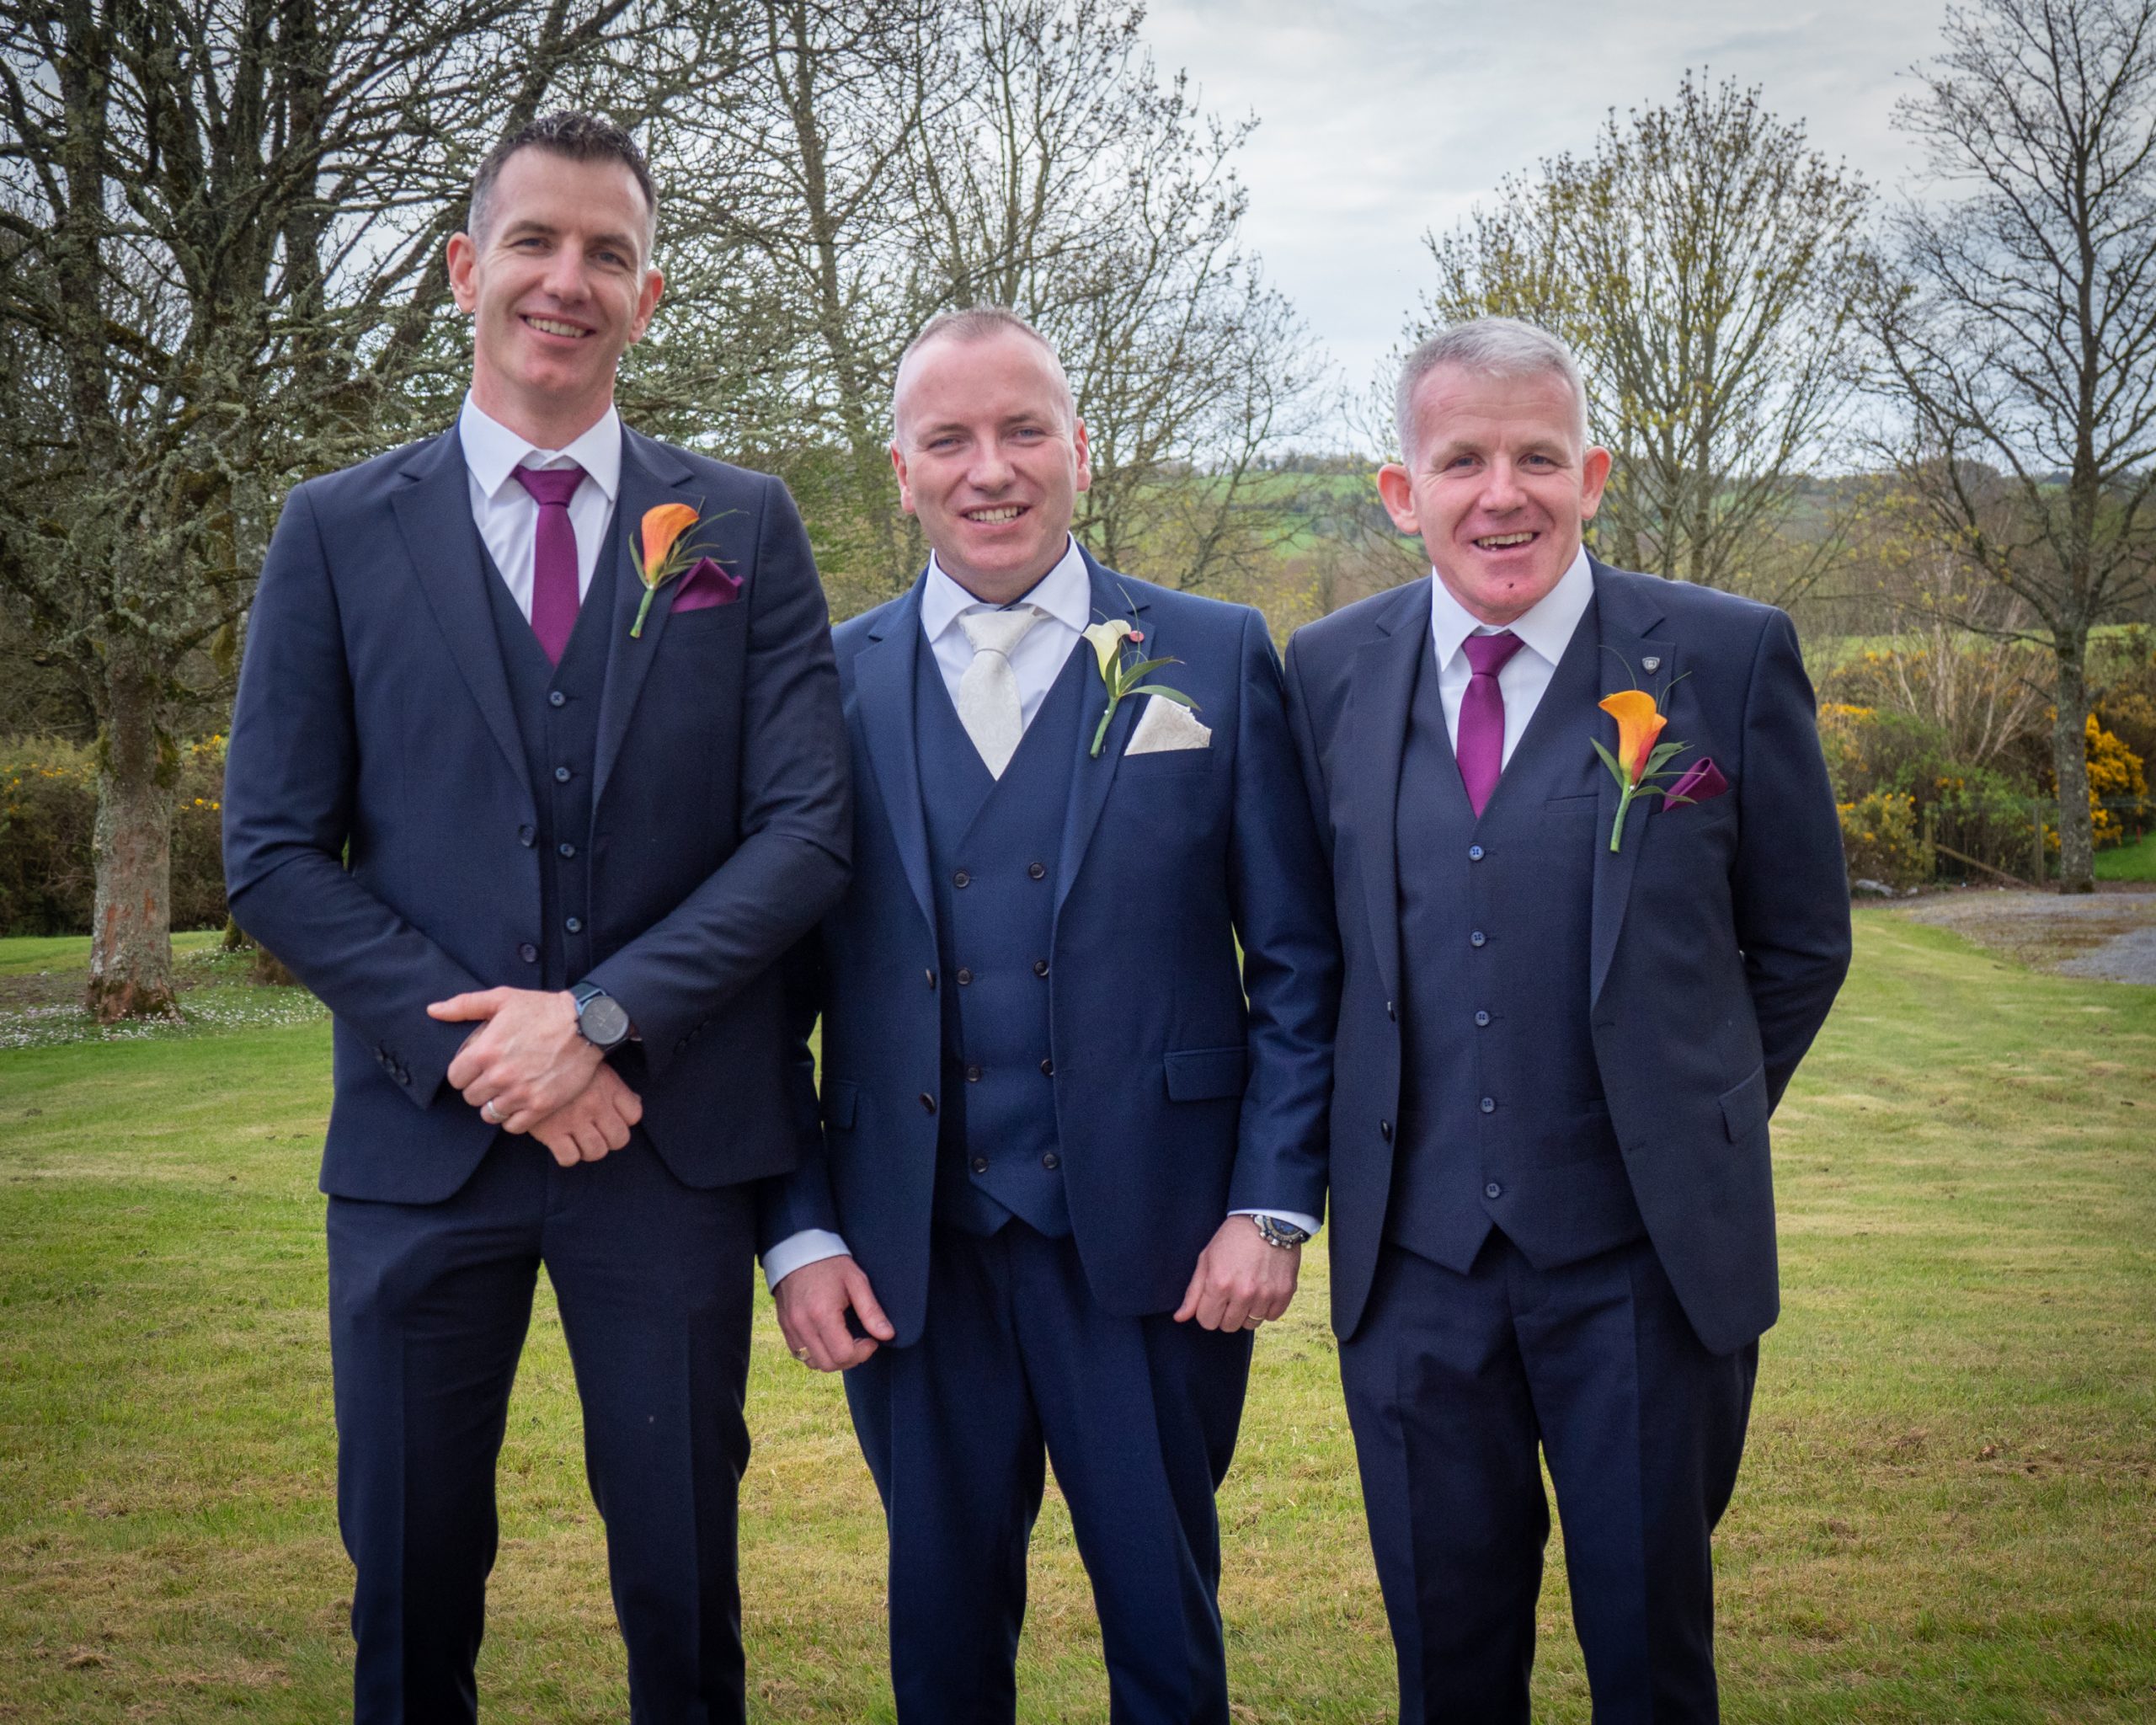 Best Man, Groom, and Groom's Dad stand for a photo in their wedding finery.